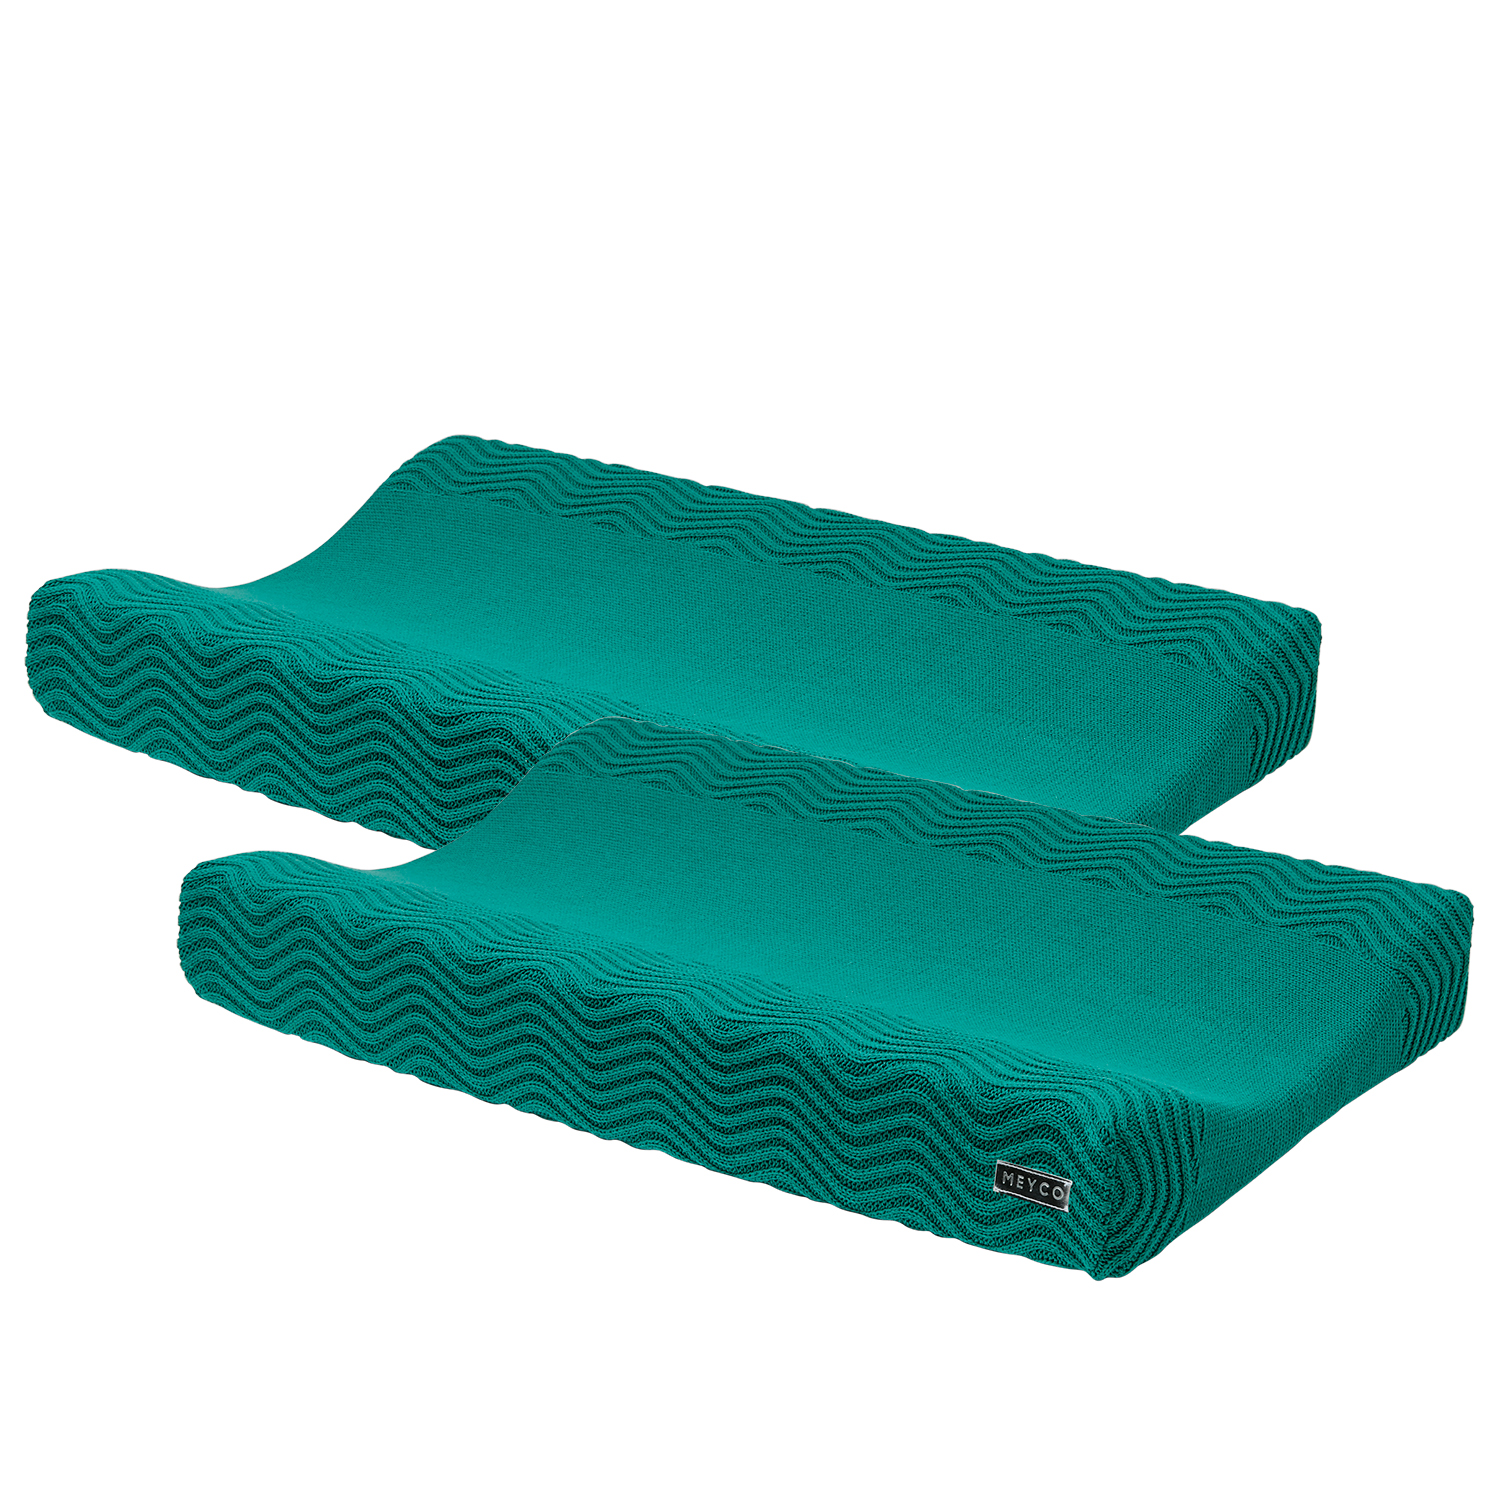 Changing mat cover 2-pack Waves - emerald green - 50x70cm